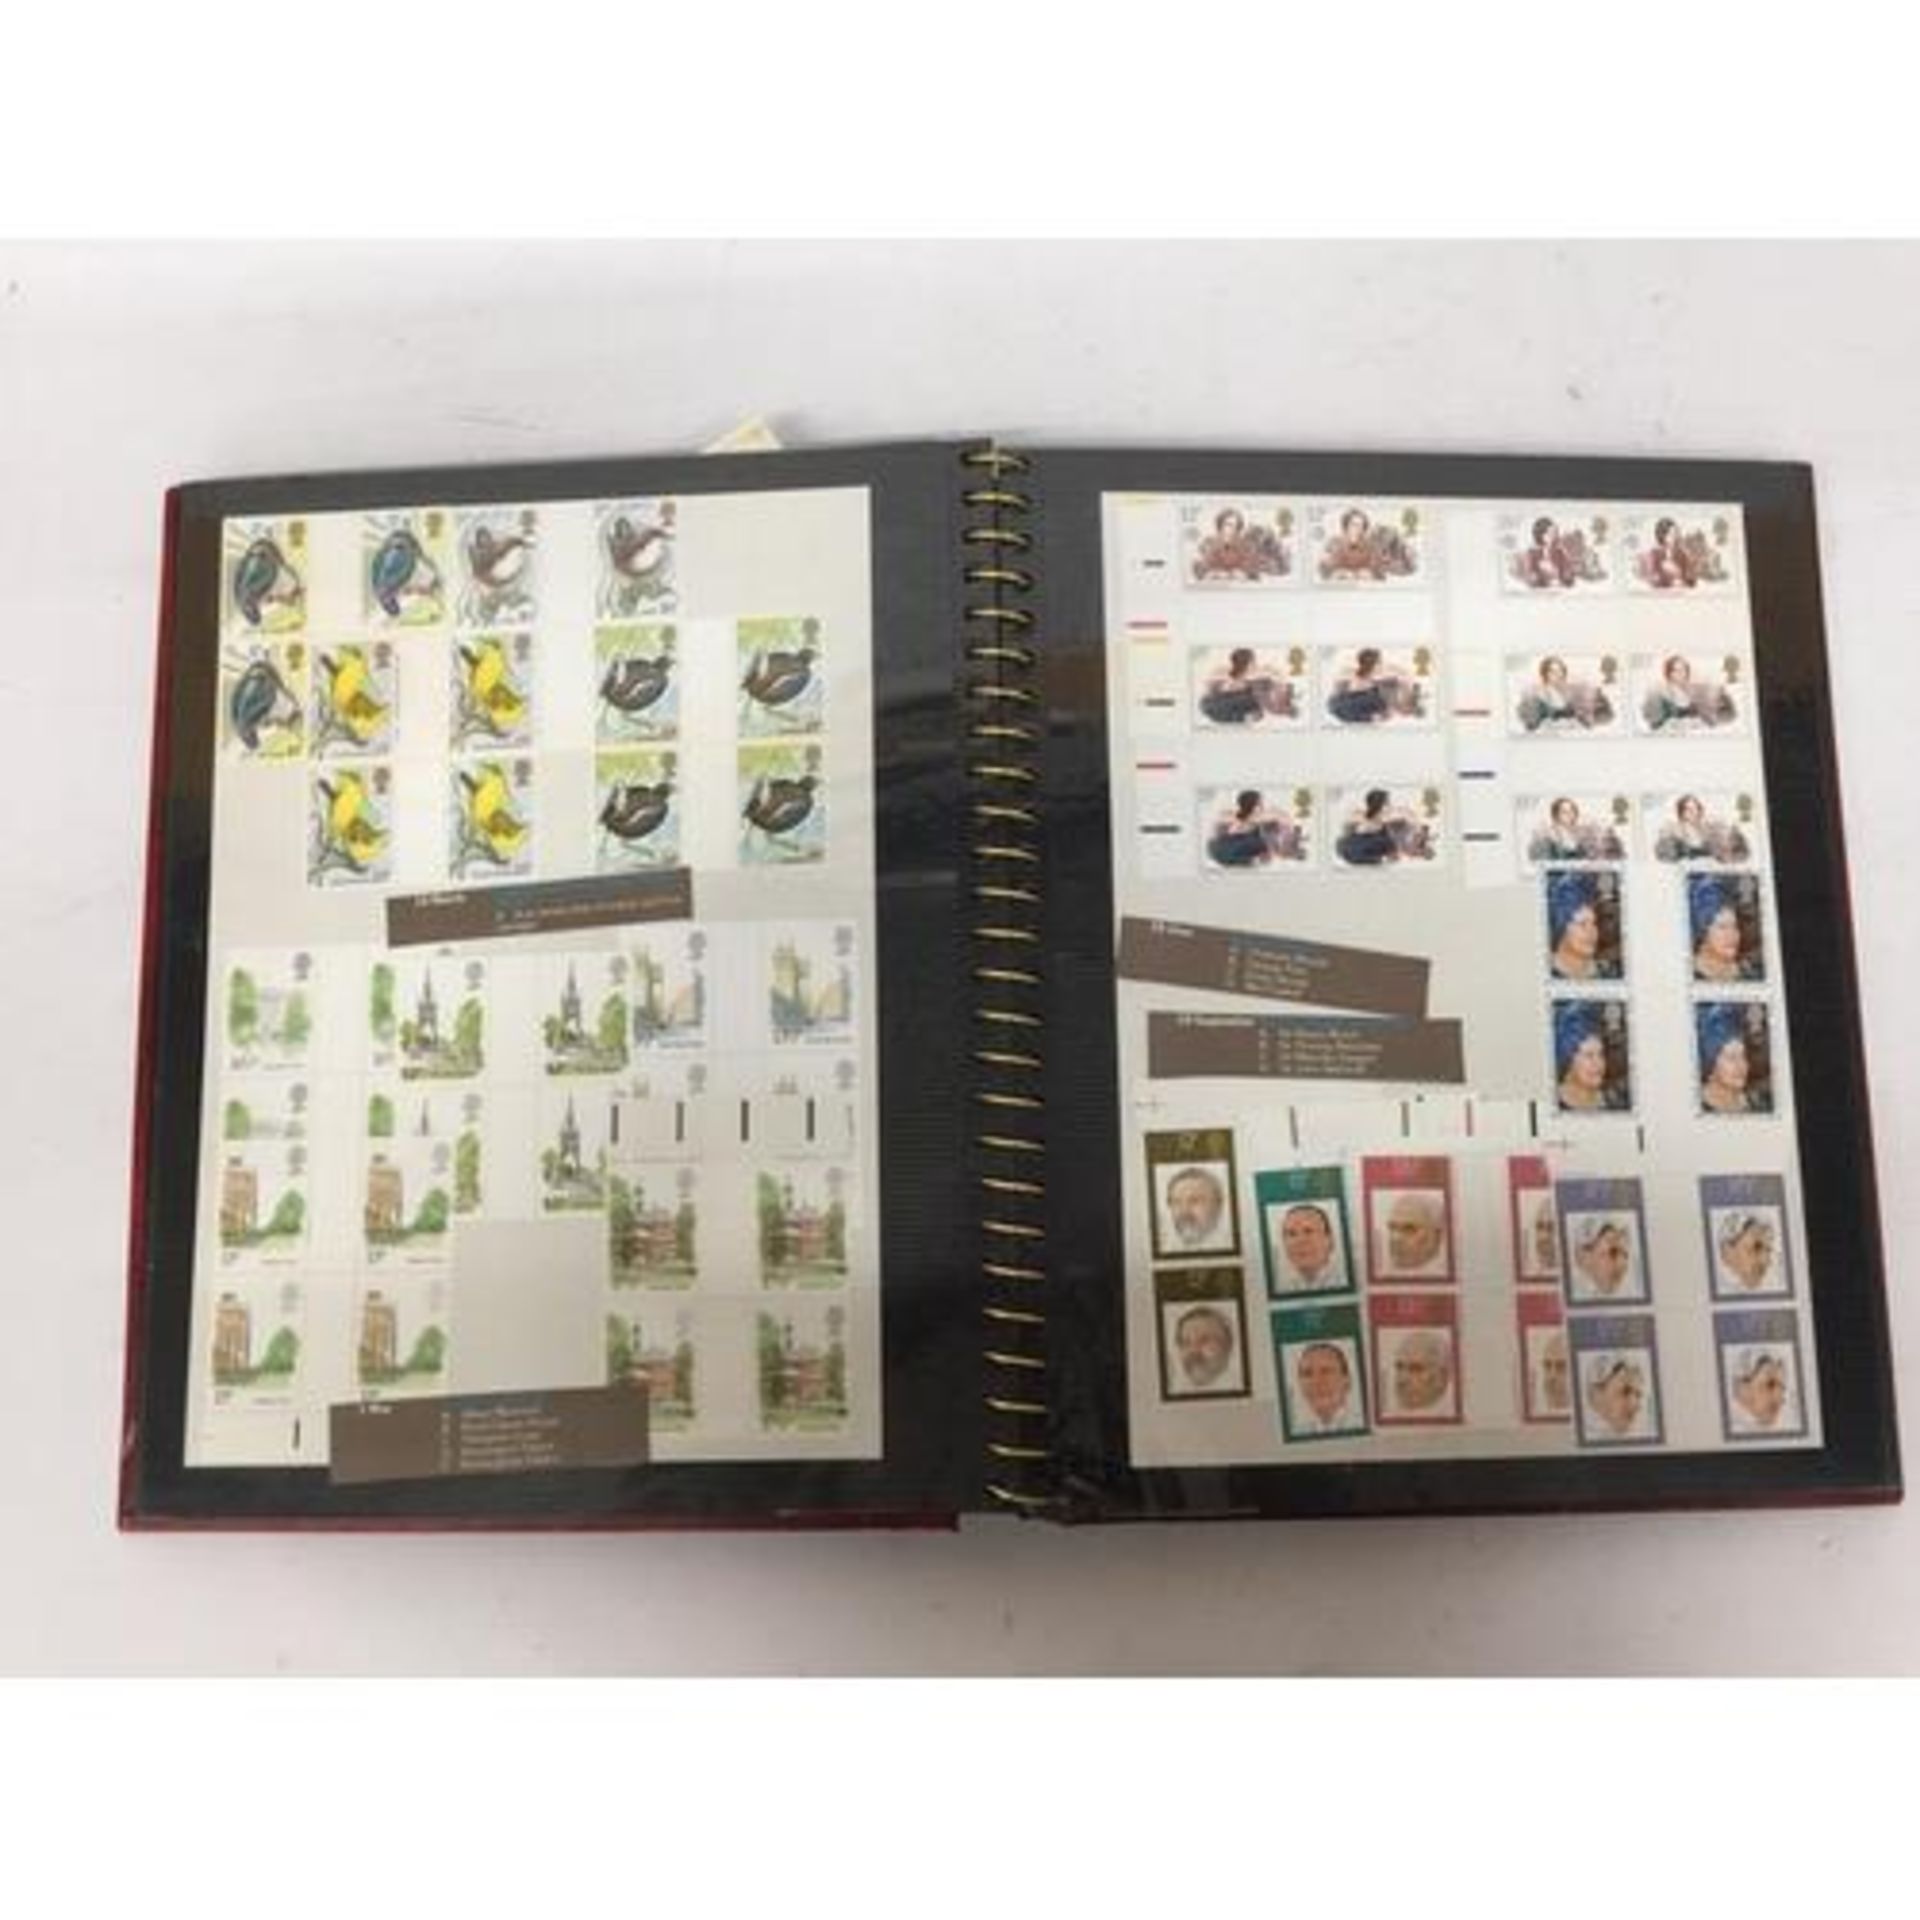 A STAMP ALBUM CONTAINING A LARGE QUANTITY OF BRITISH MINT STAMPS - Image 2 of 3